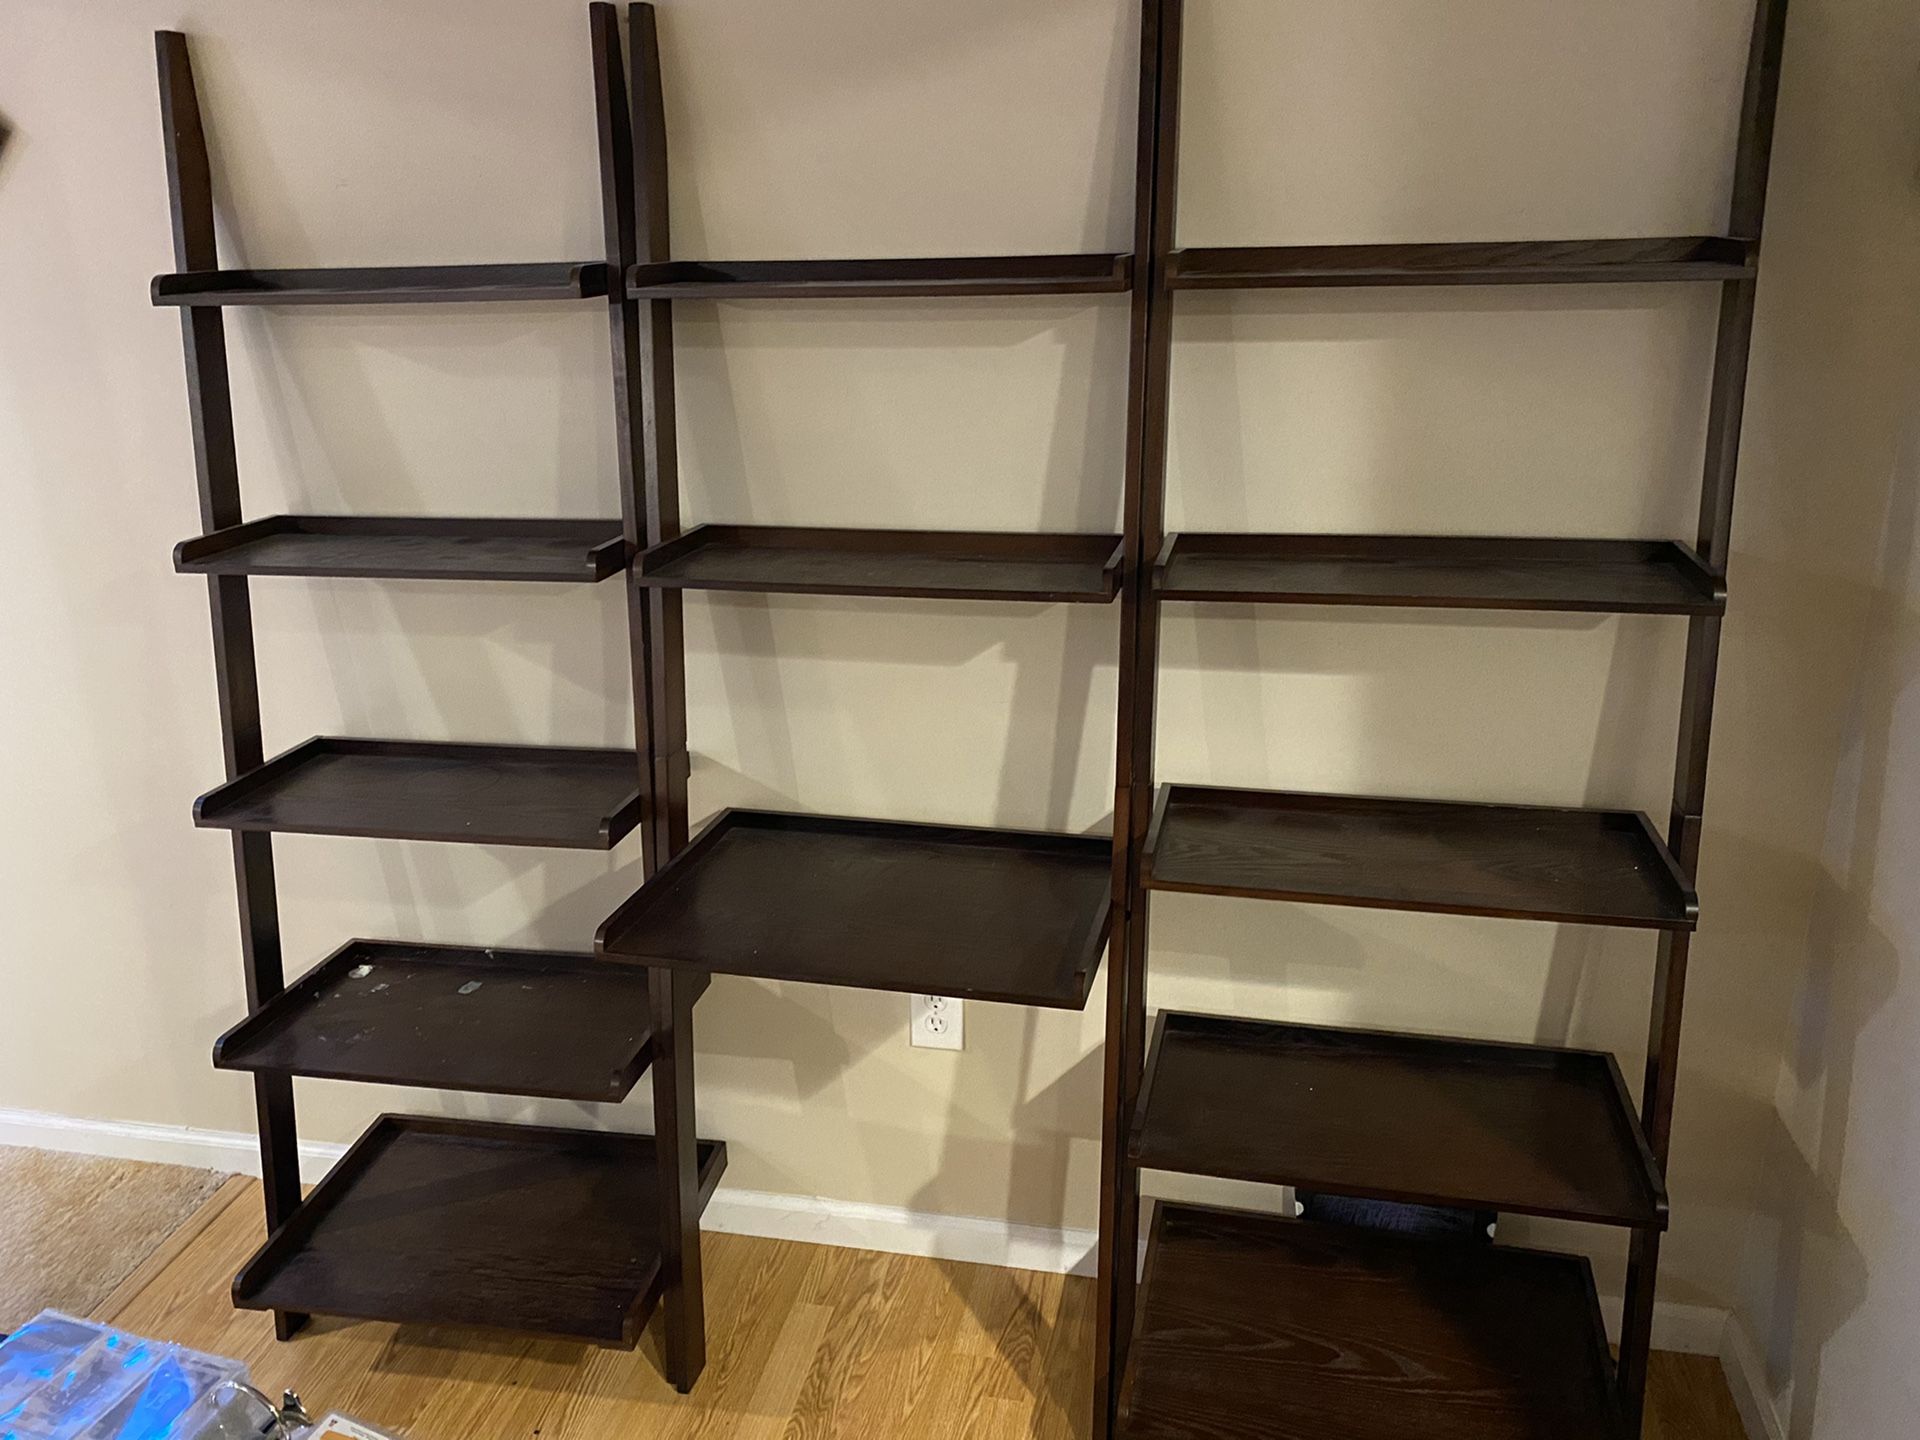 3 piece shelf about 5 1/2 to 6ft tall.